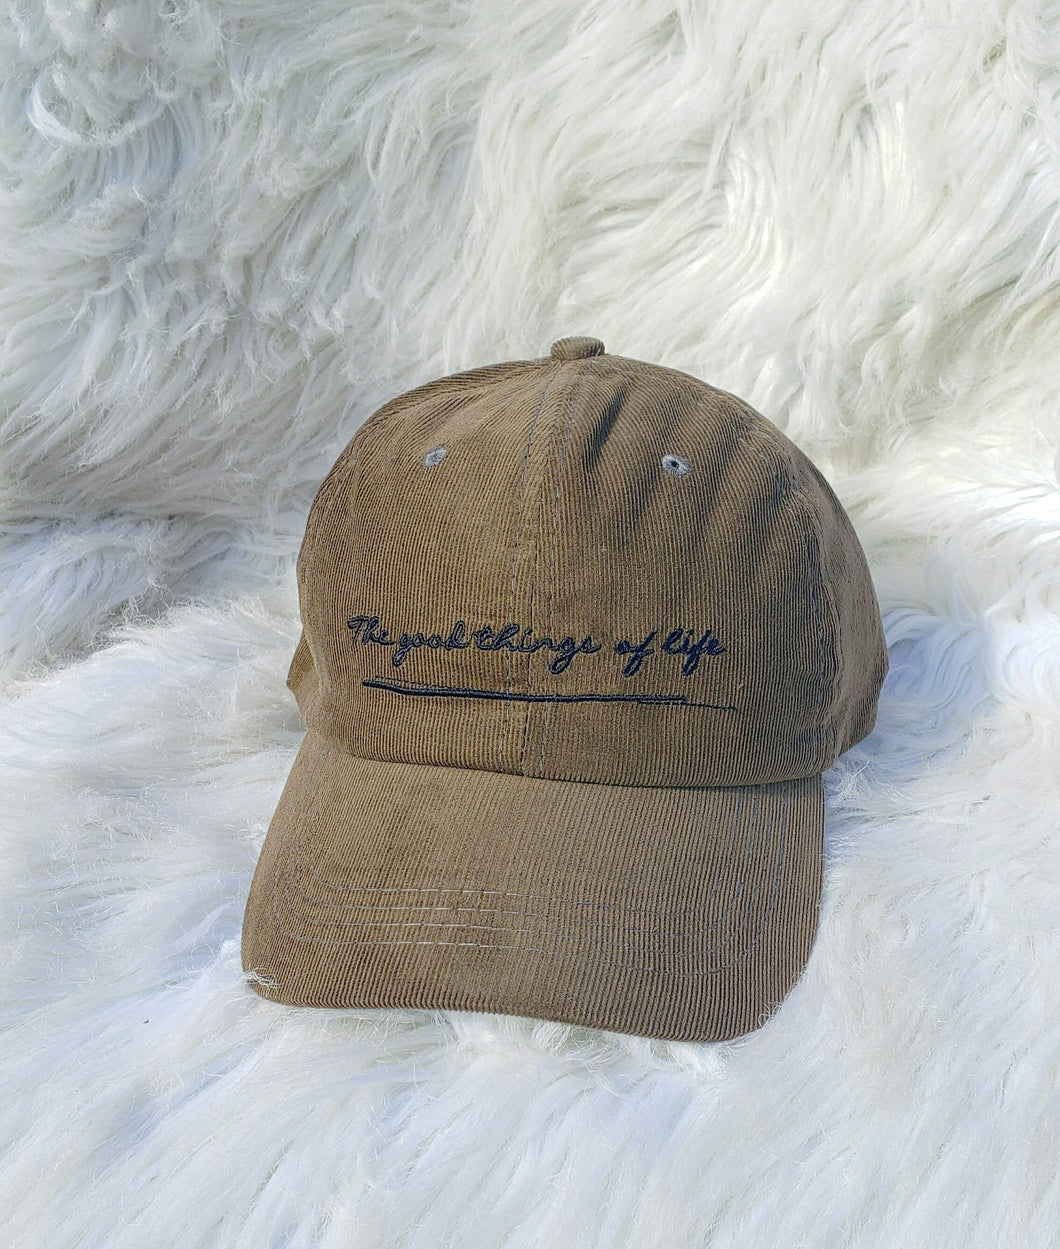 The Good Things Of Life Cap